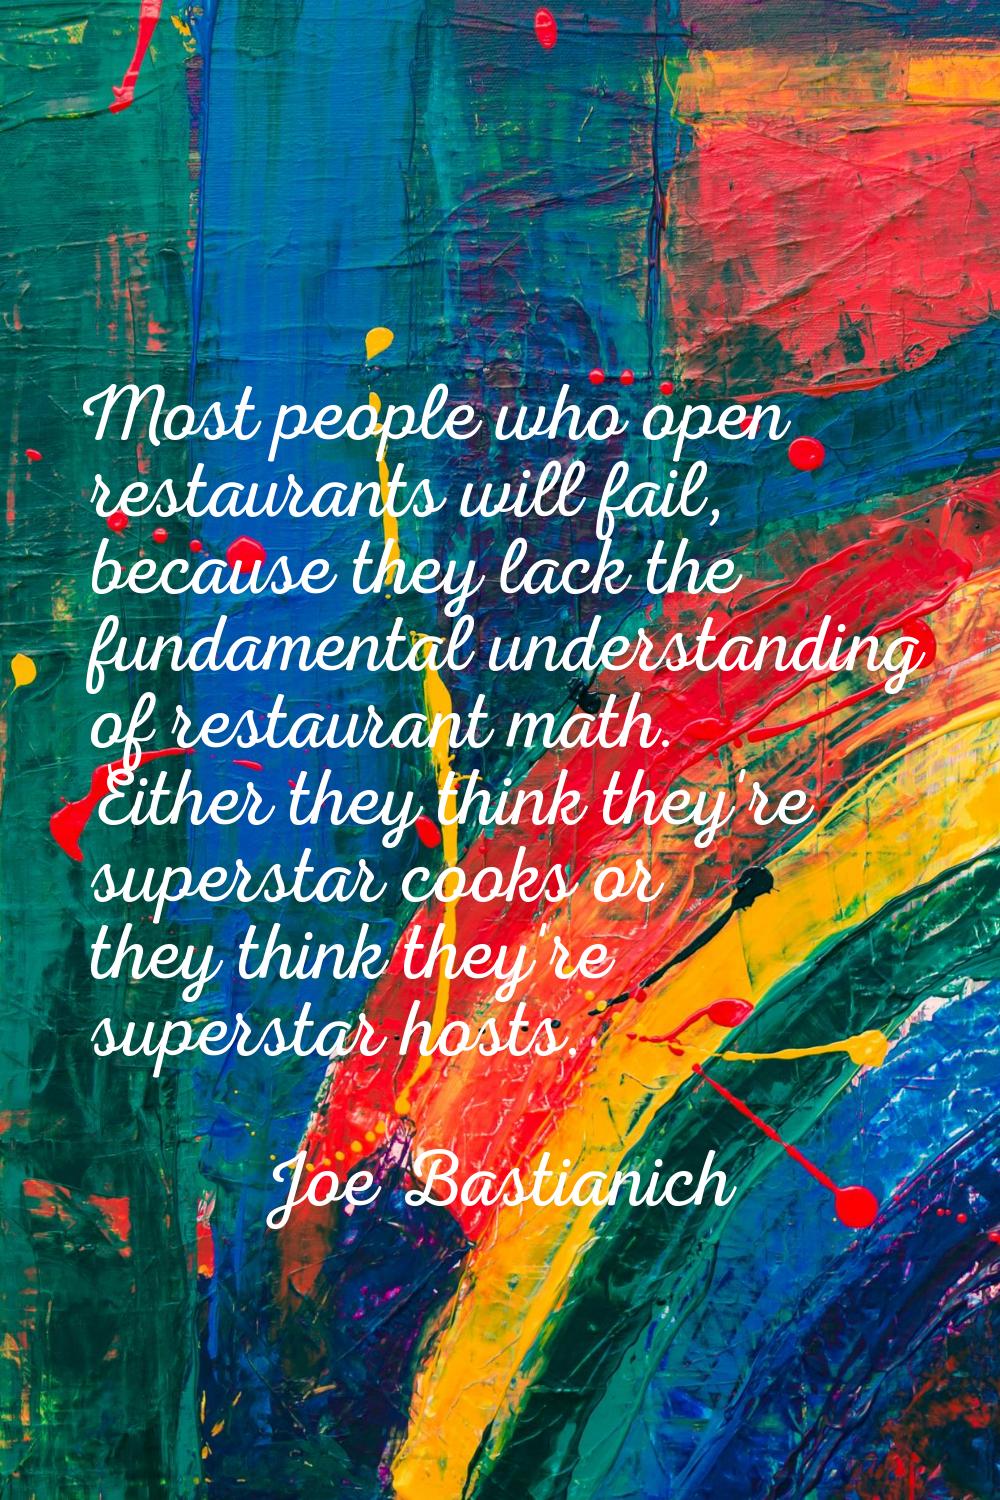 Most people who open restaurants will fail, because they lack the fundamental understanding of rest